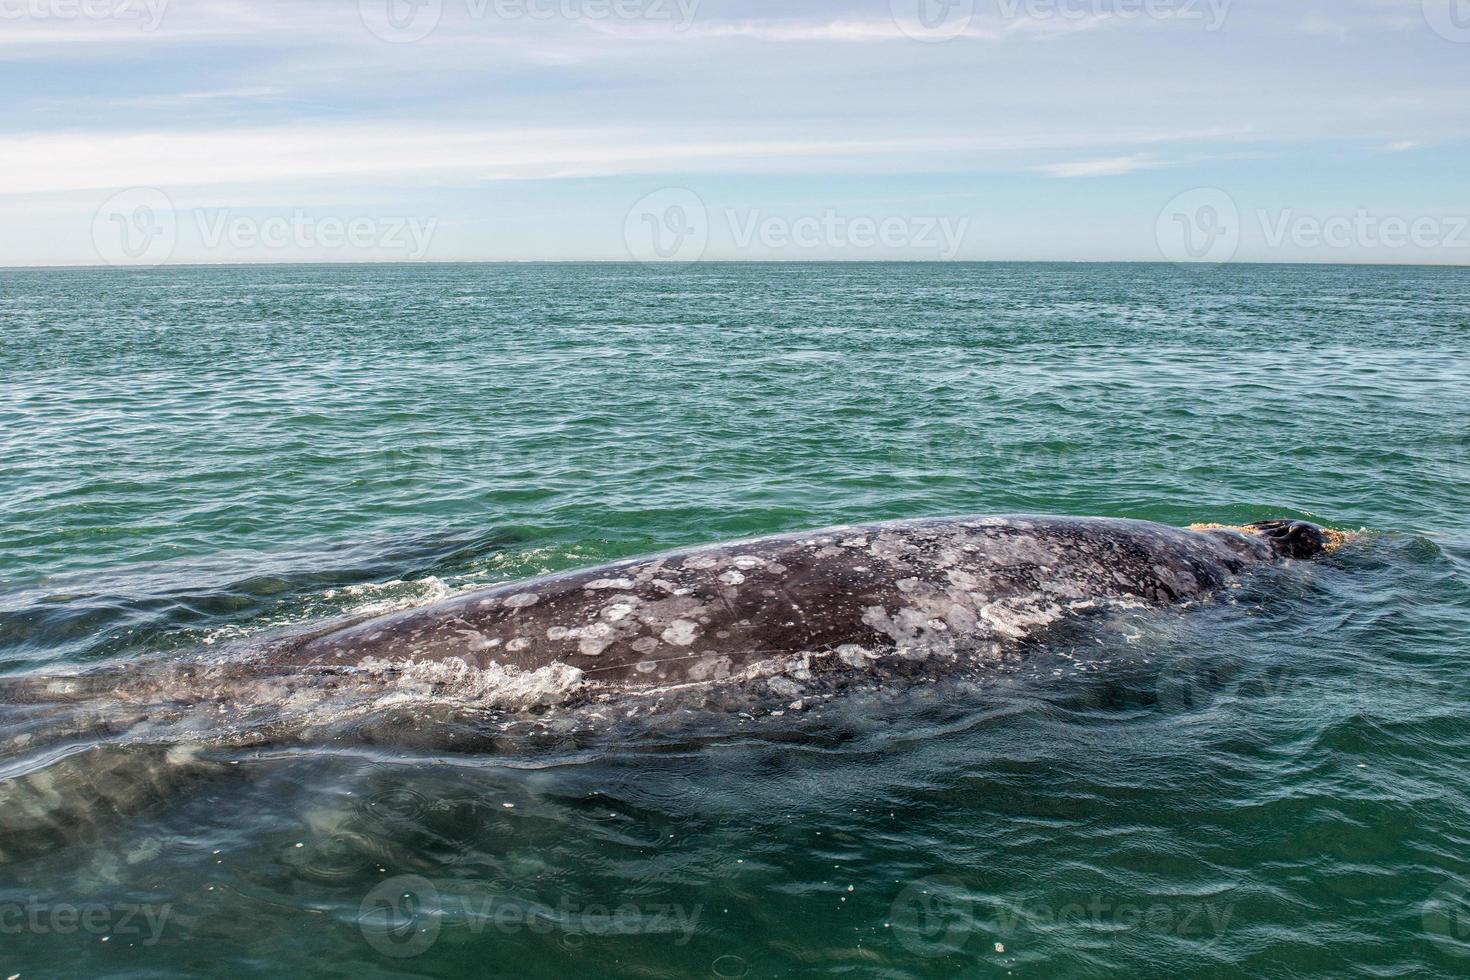 grey whale while blowing for breathing photo